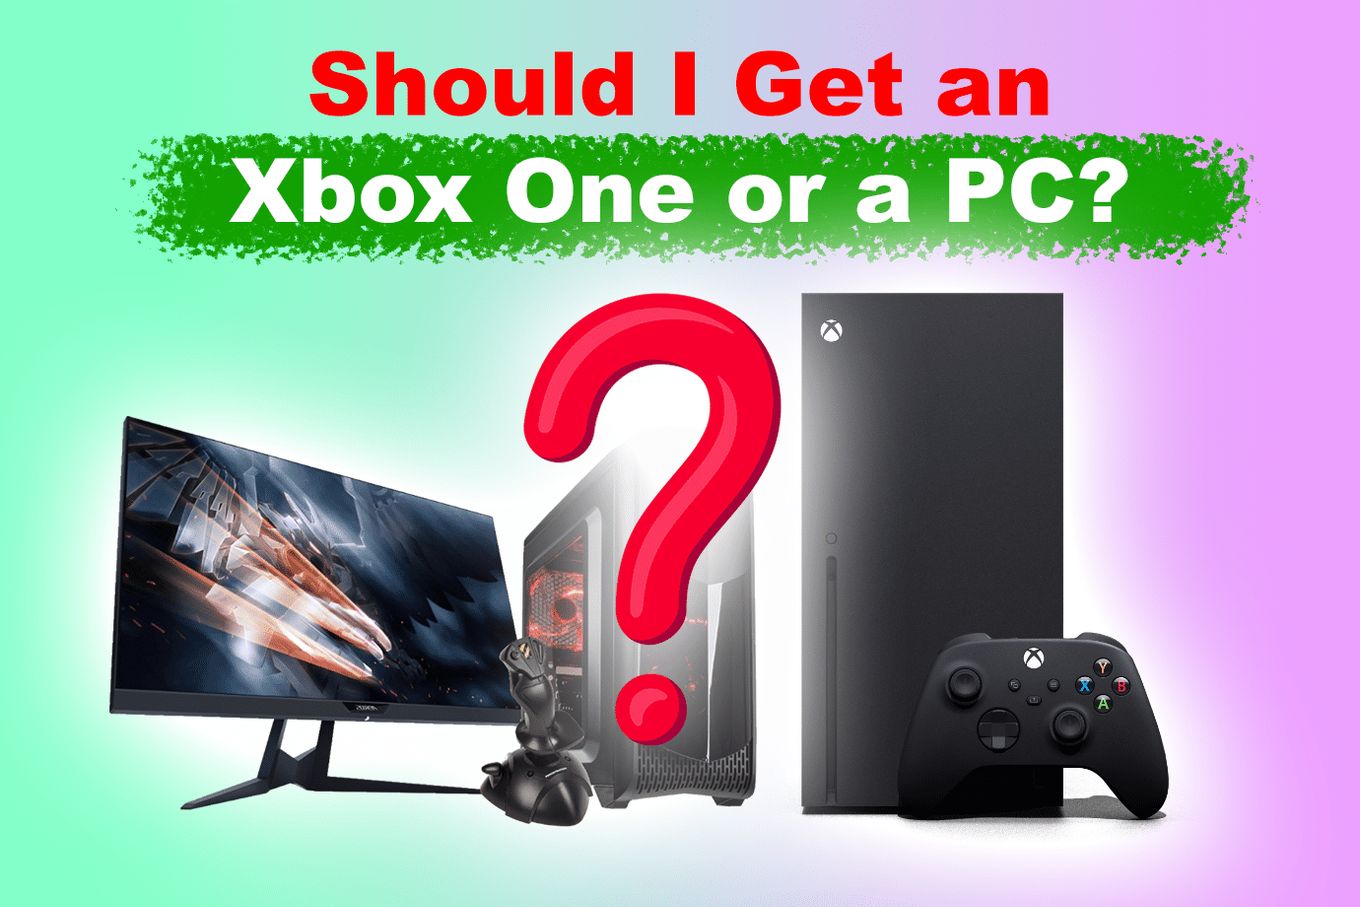 Xbox One or Gaming PC?